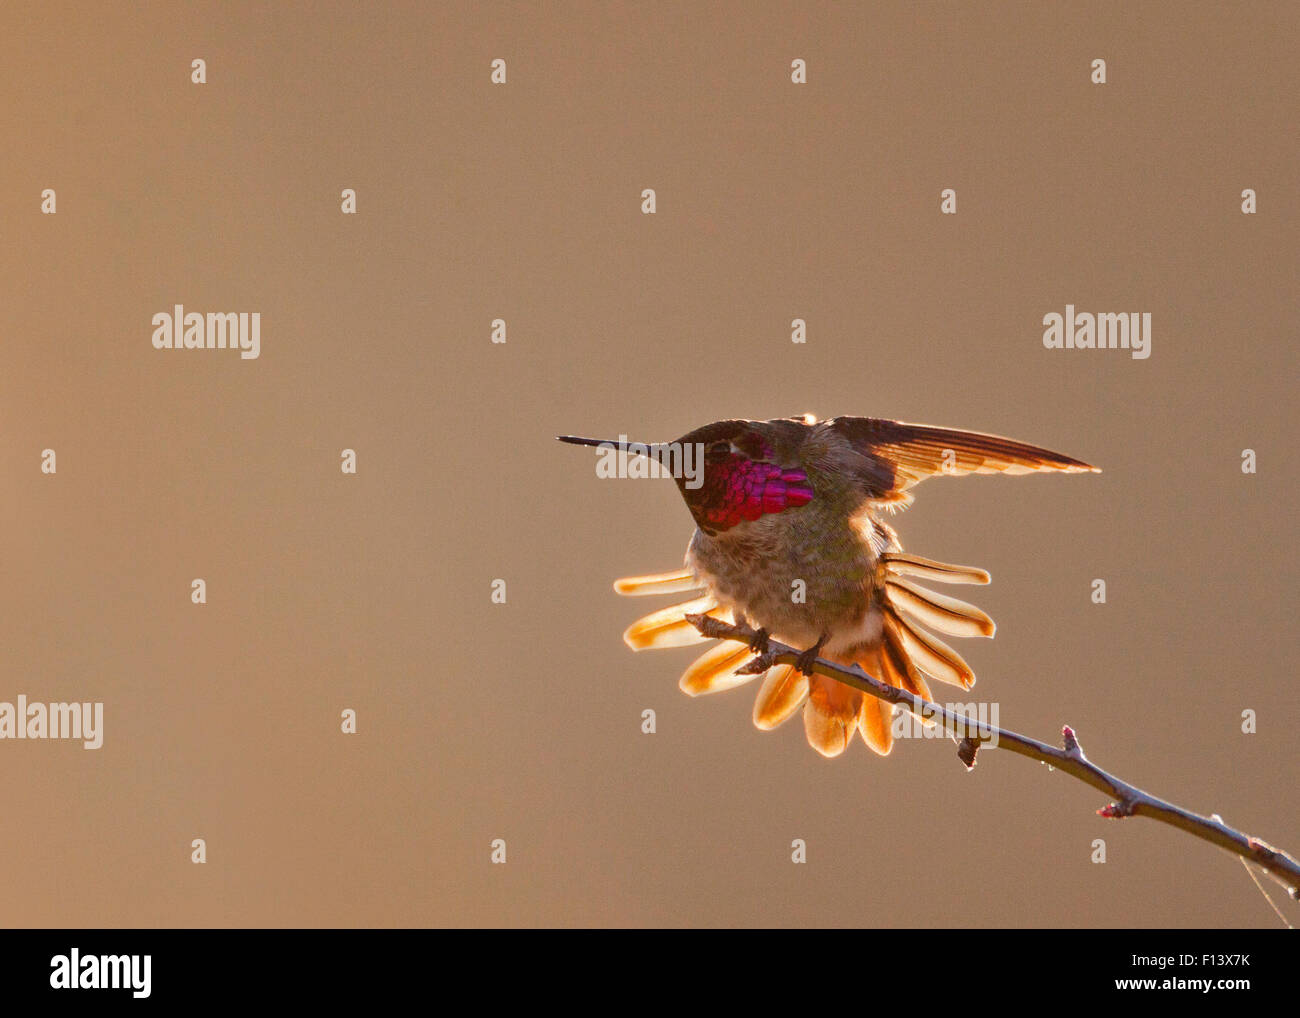 Anna's Hummingbird (Calypte anna) with tail feathers outstretched and wings up at sunrise in Mount Diablo State Park, California, USA. February. Stock Photo